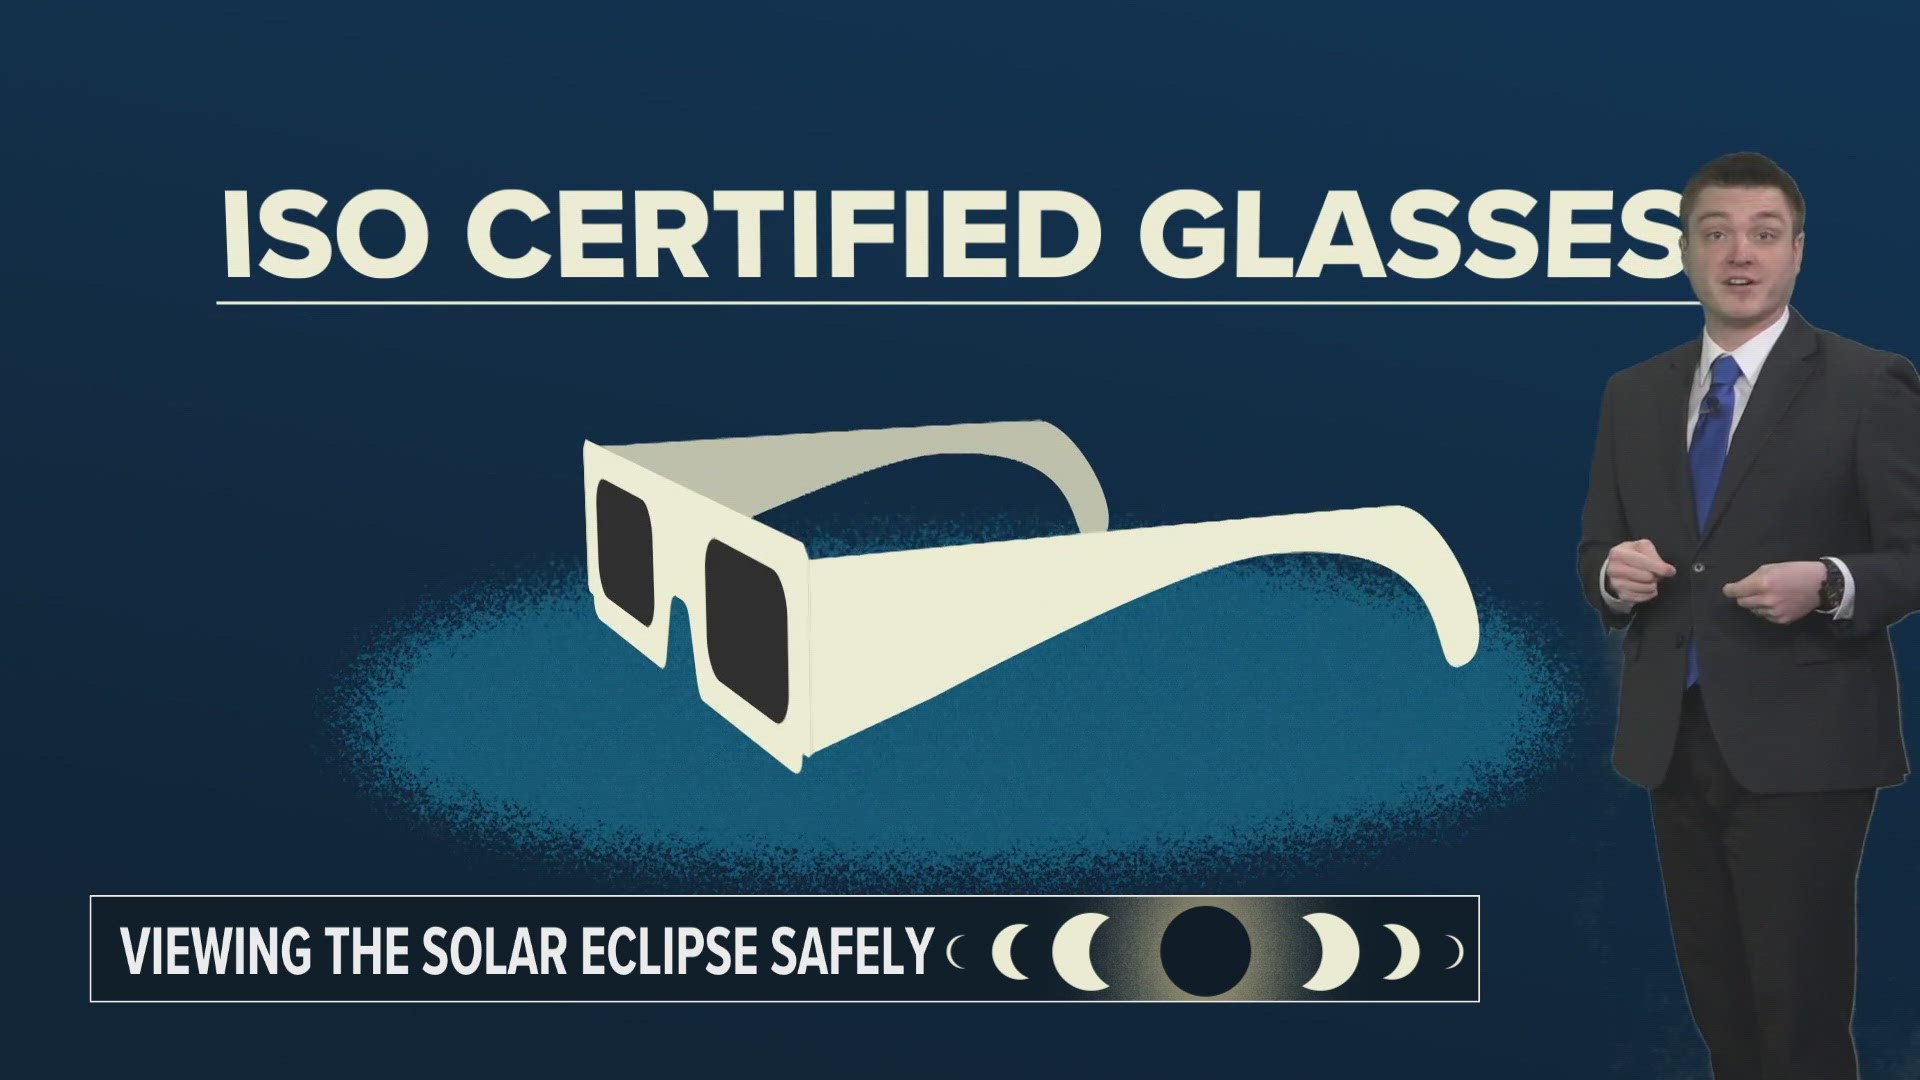 Here's what you need to know to safely view the solar eclipse on April 8, 2024.